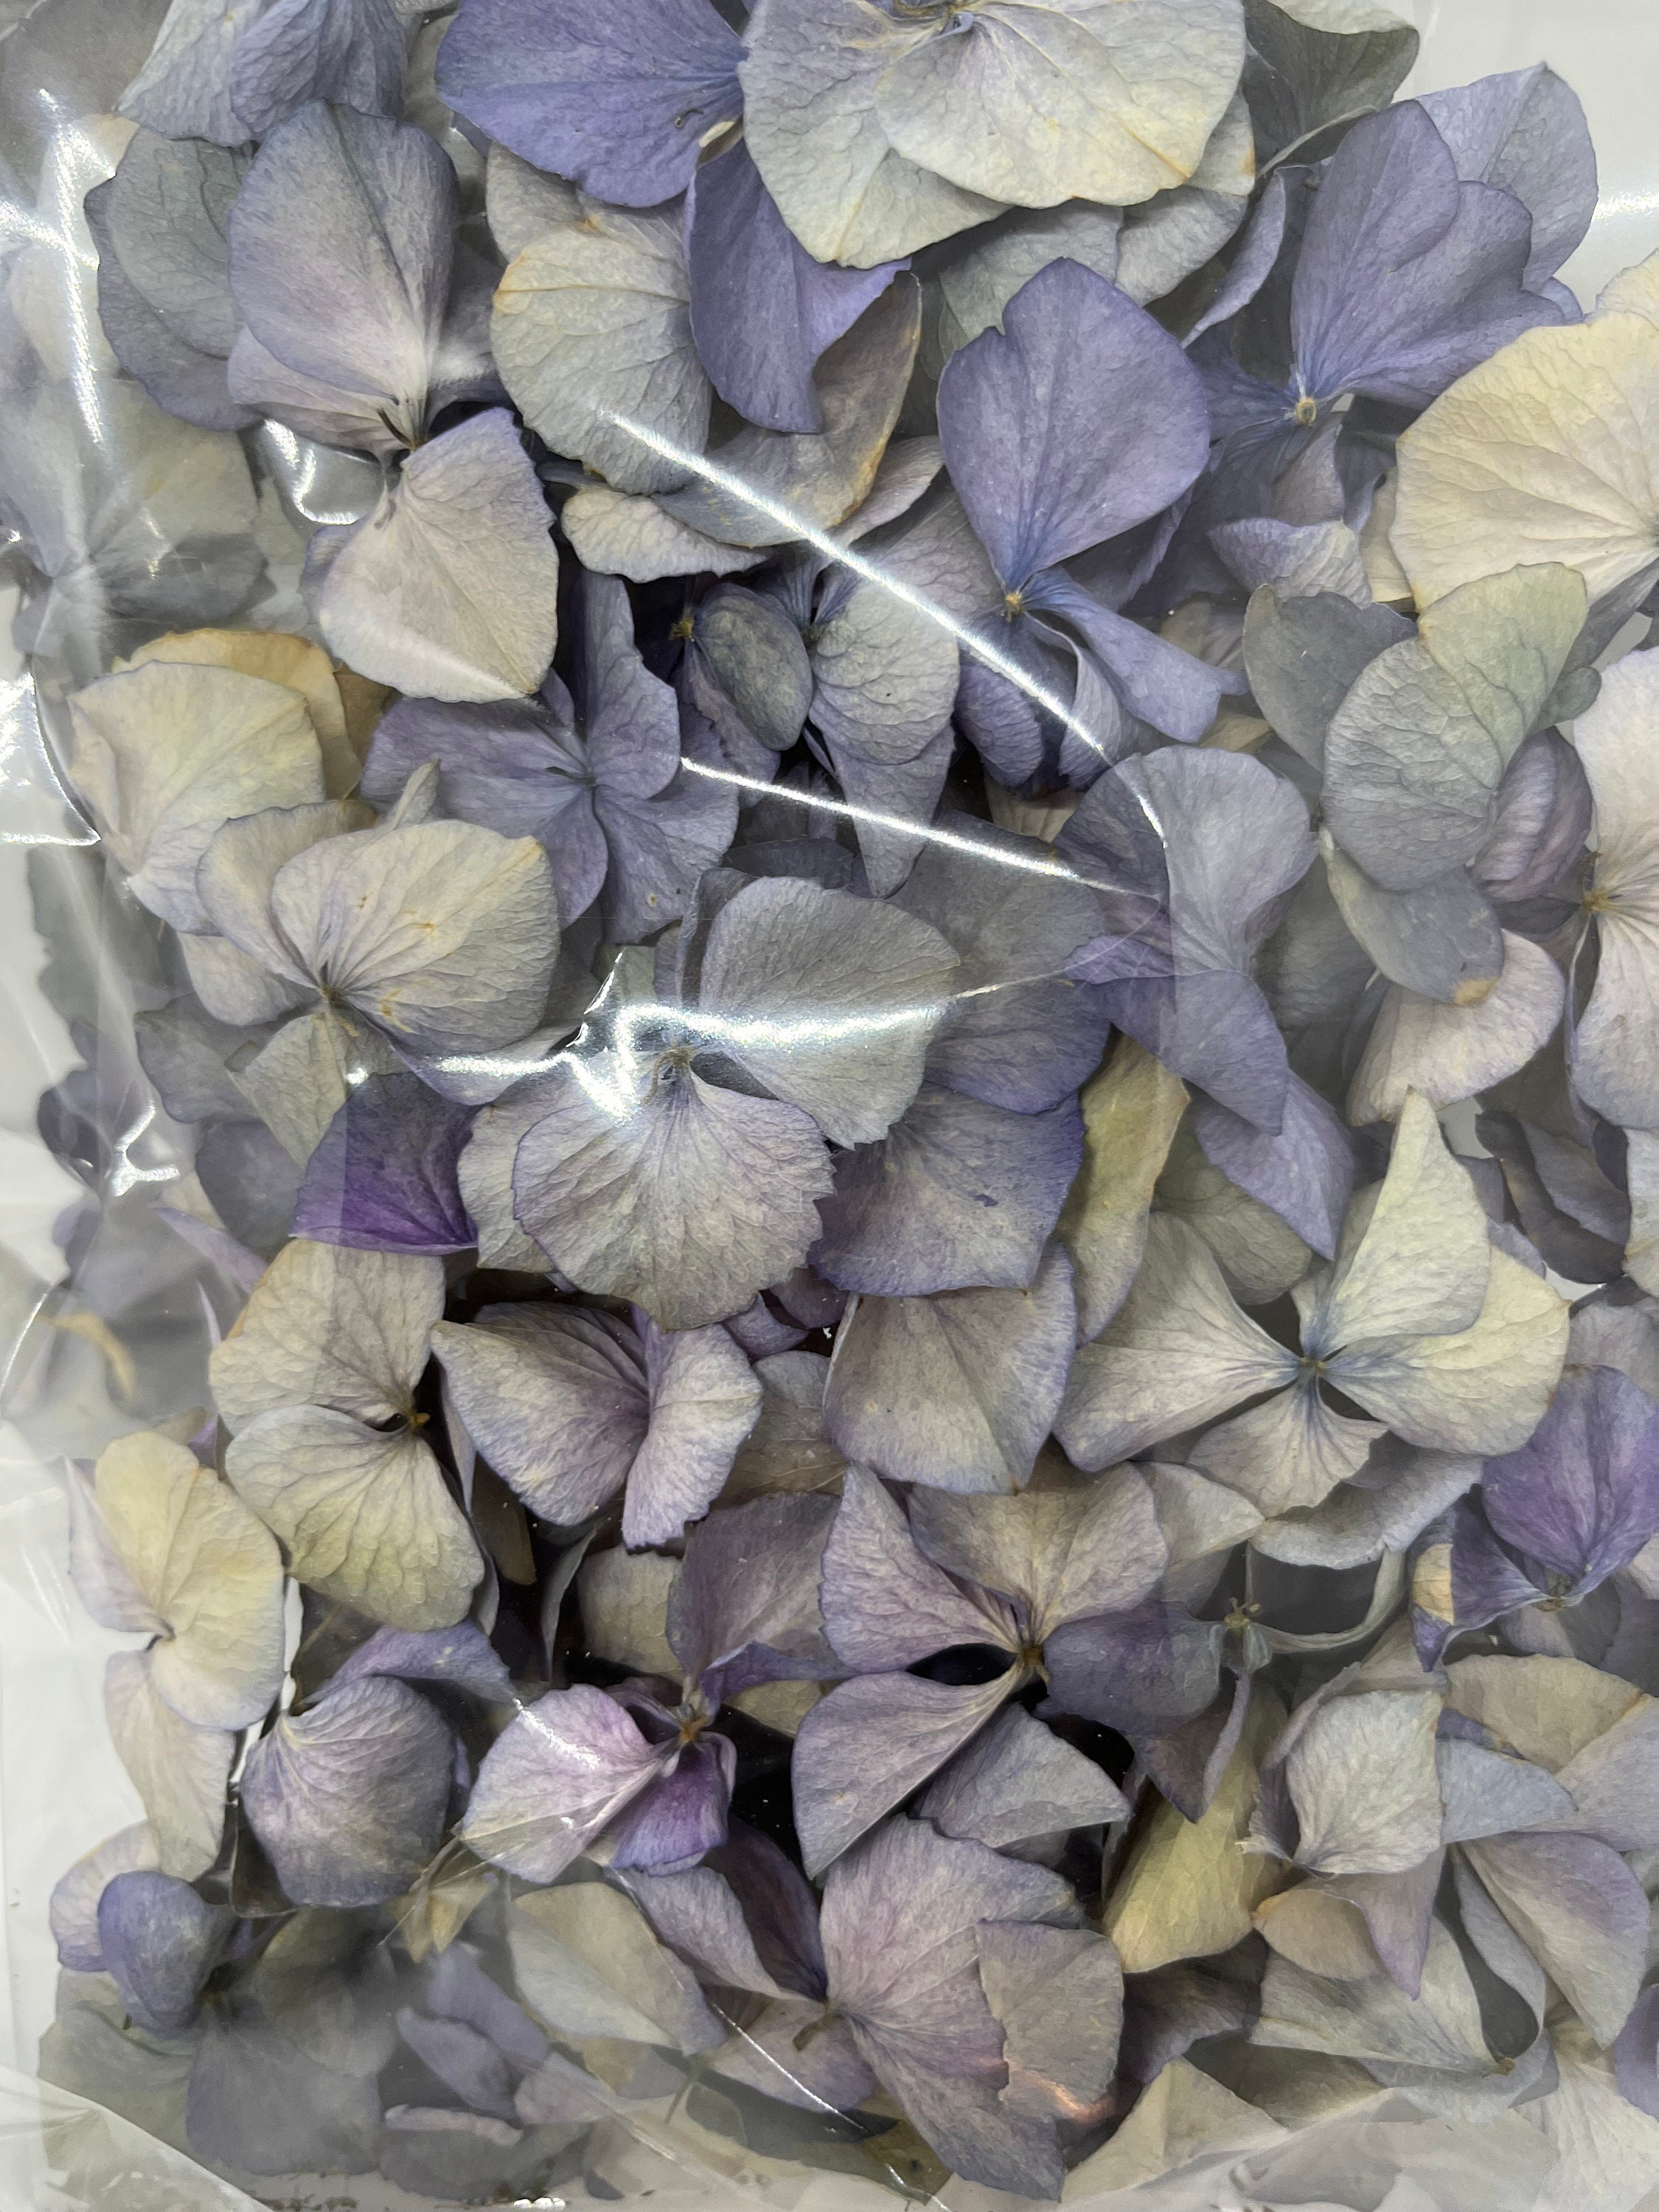 Dried Hydrangea Flower Petals Stock Photo - Image of color, dried: 103137270